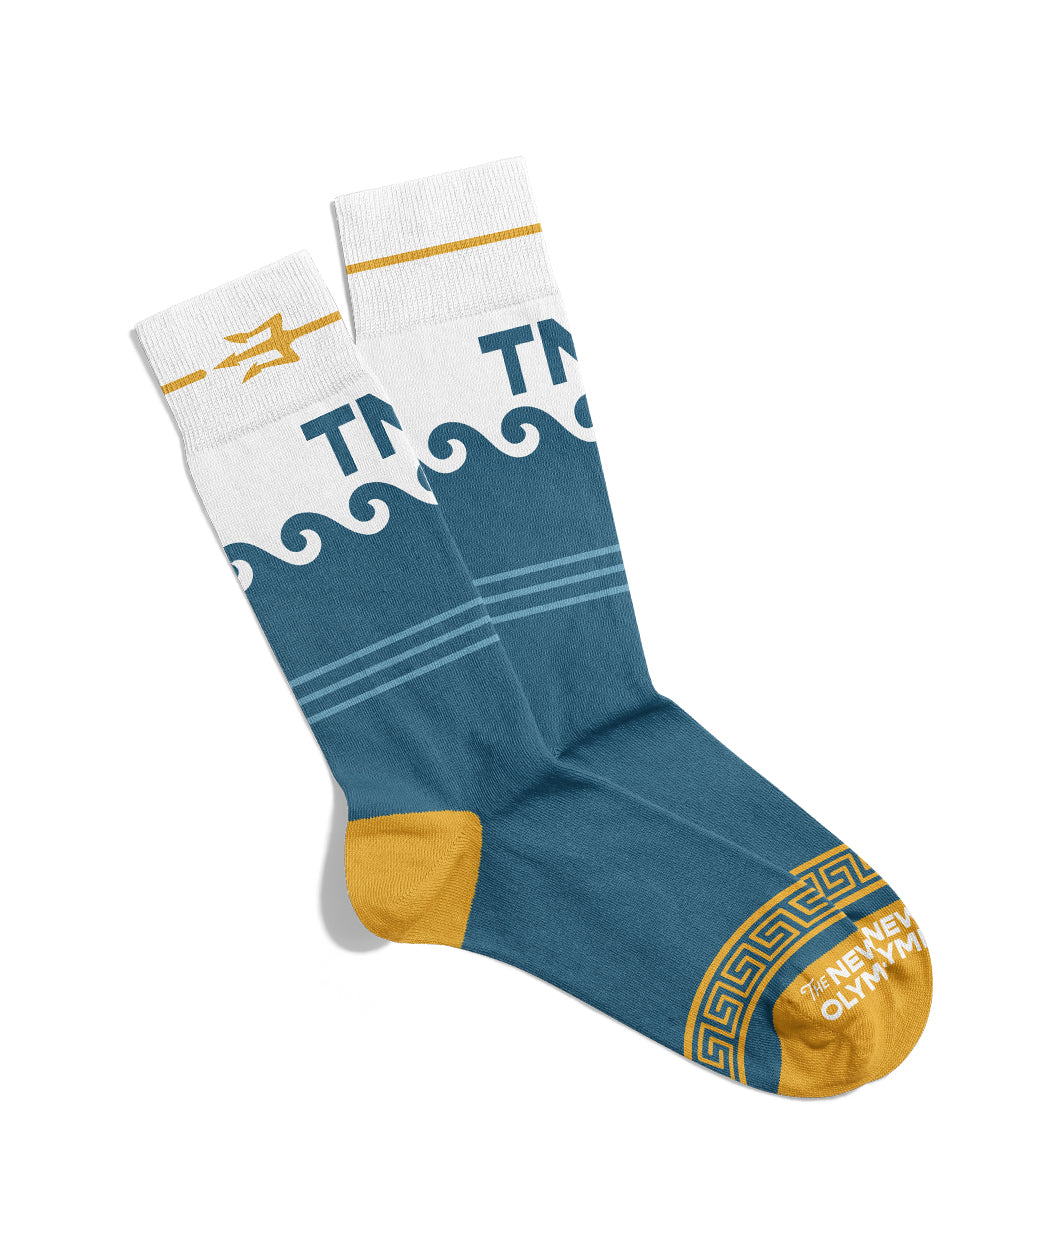 A pair of socks that are mostly blue with breaking waves at the top of the socks. The very top of the socks are white with a yellow trident and the letters 